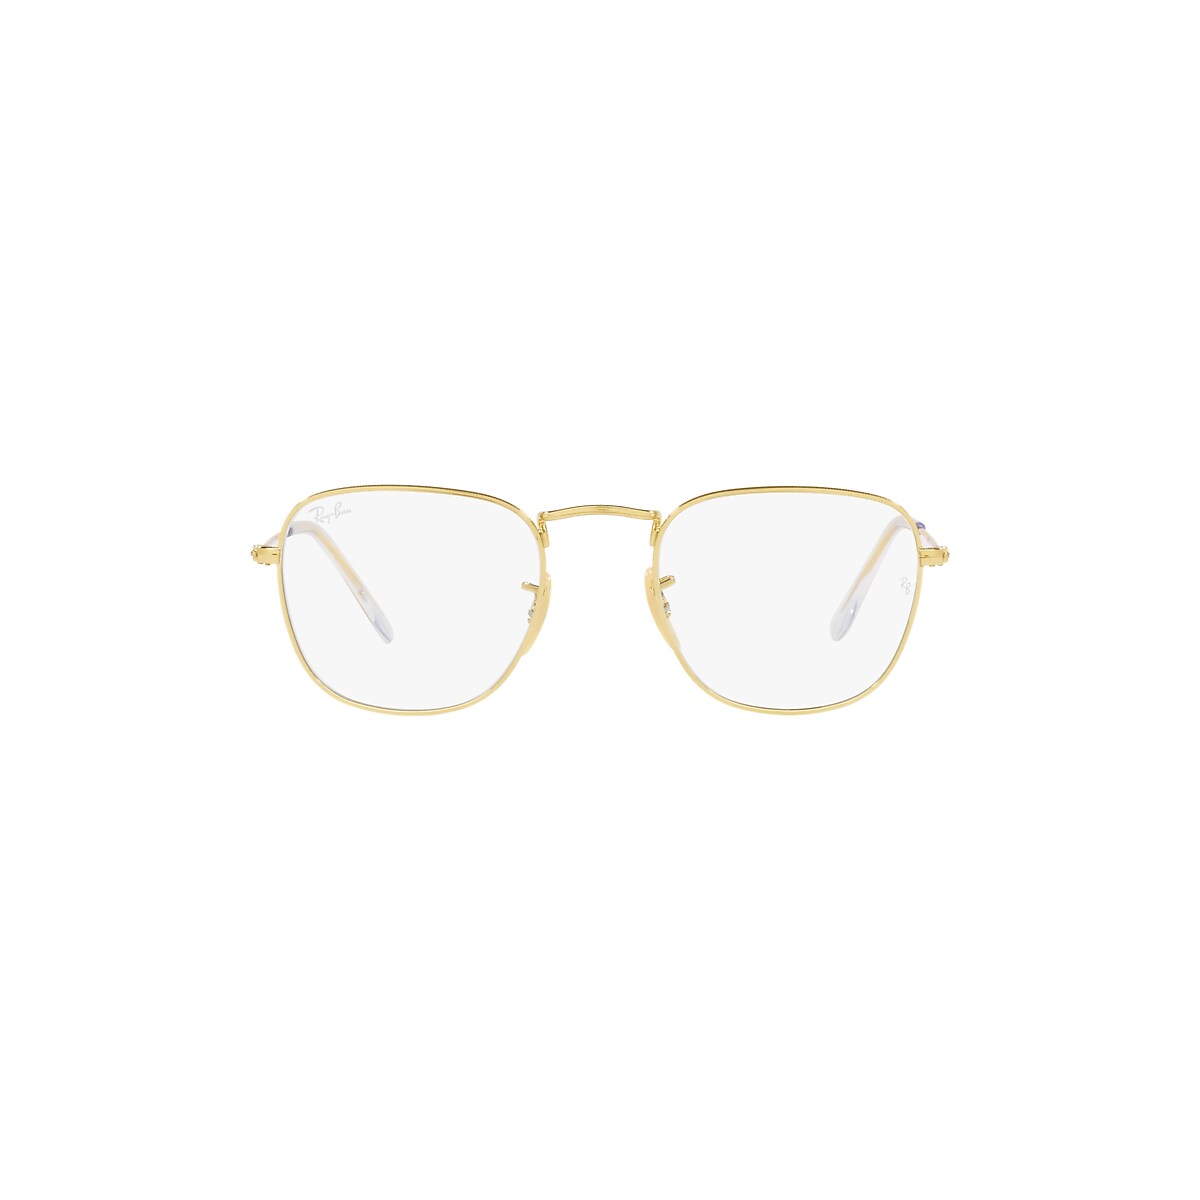 FRANK TRANSITIONS® Sunglasses in Gold and Clear/Grey - RB3857